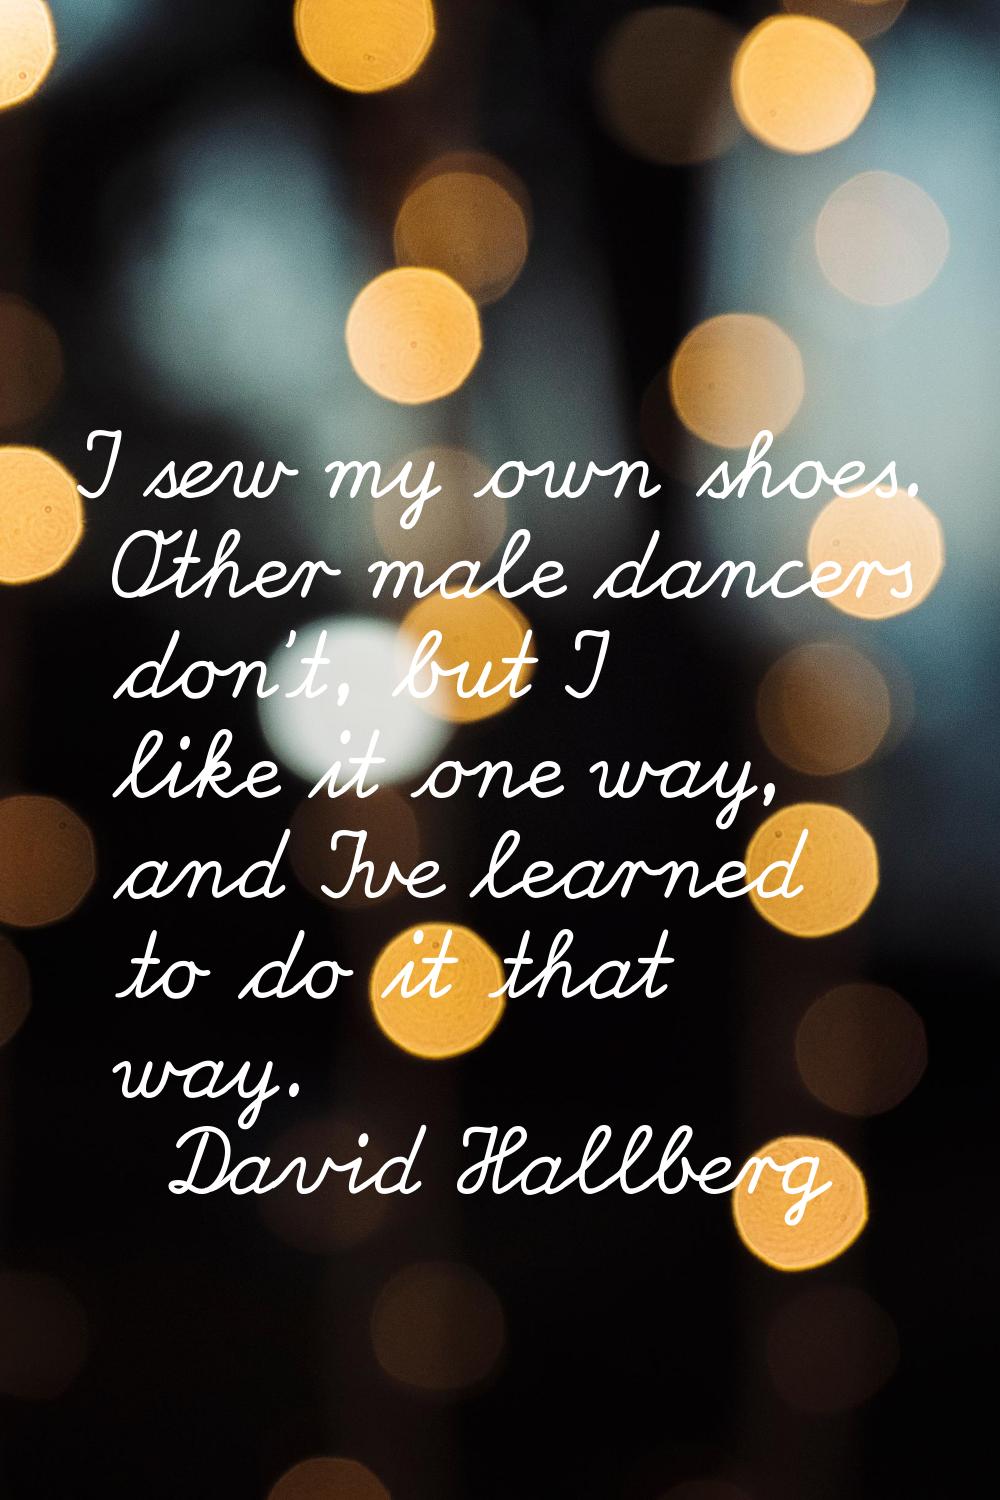 I sew my own shoes. Other male dancers don't, but I like it one way, and I've learned to do it that